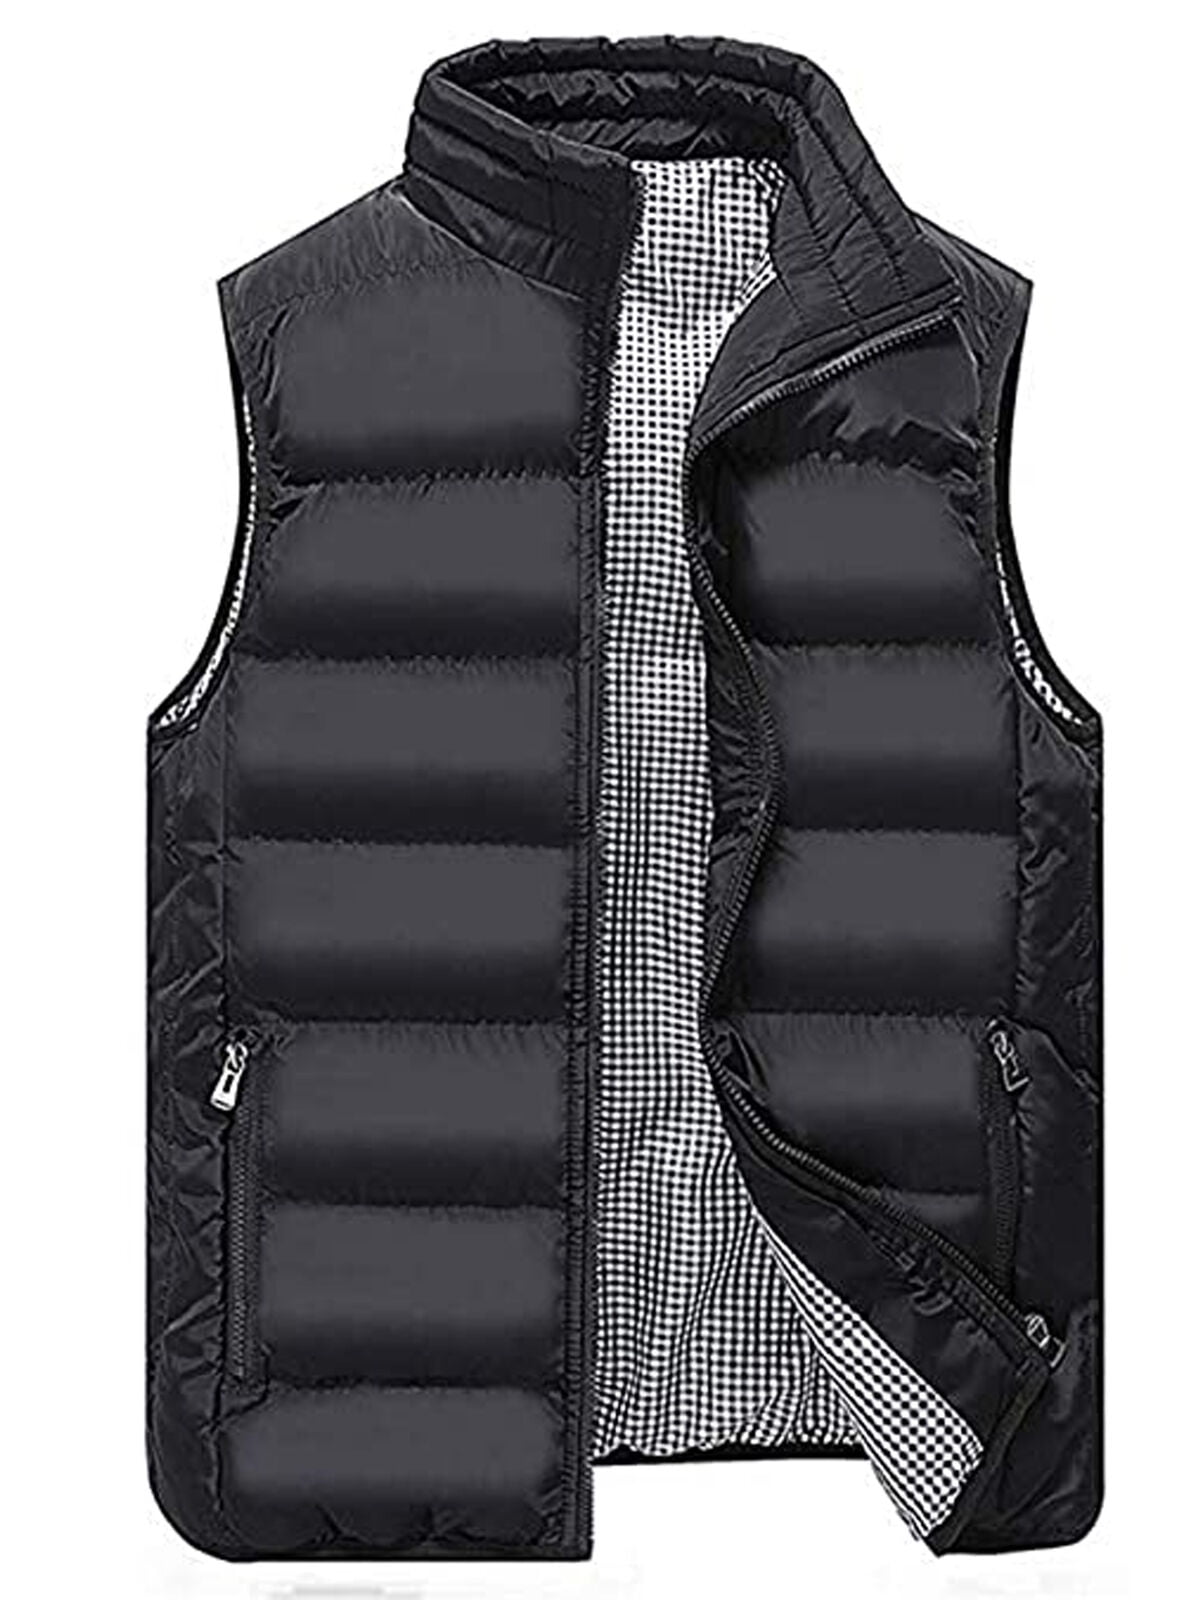 Men's Winter Warm Down Quilted Vest Body Sleeveless Padded Jacket Coat Outwear